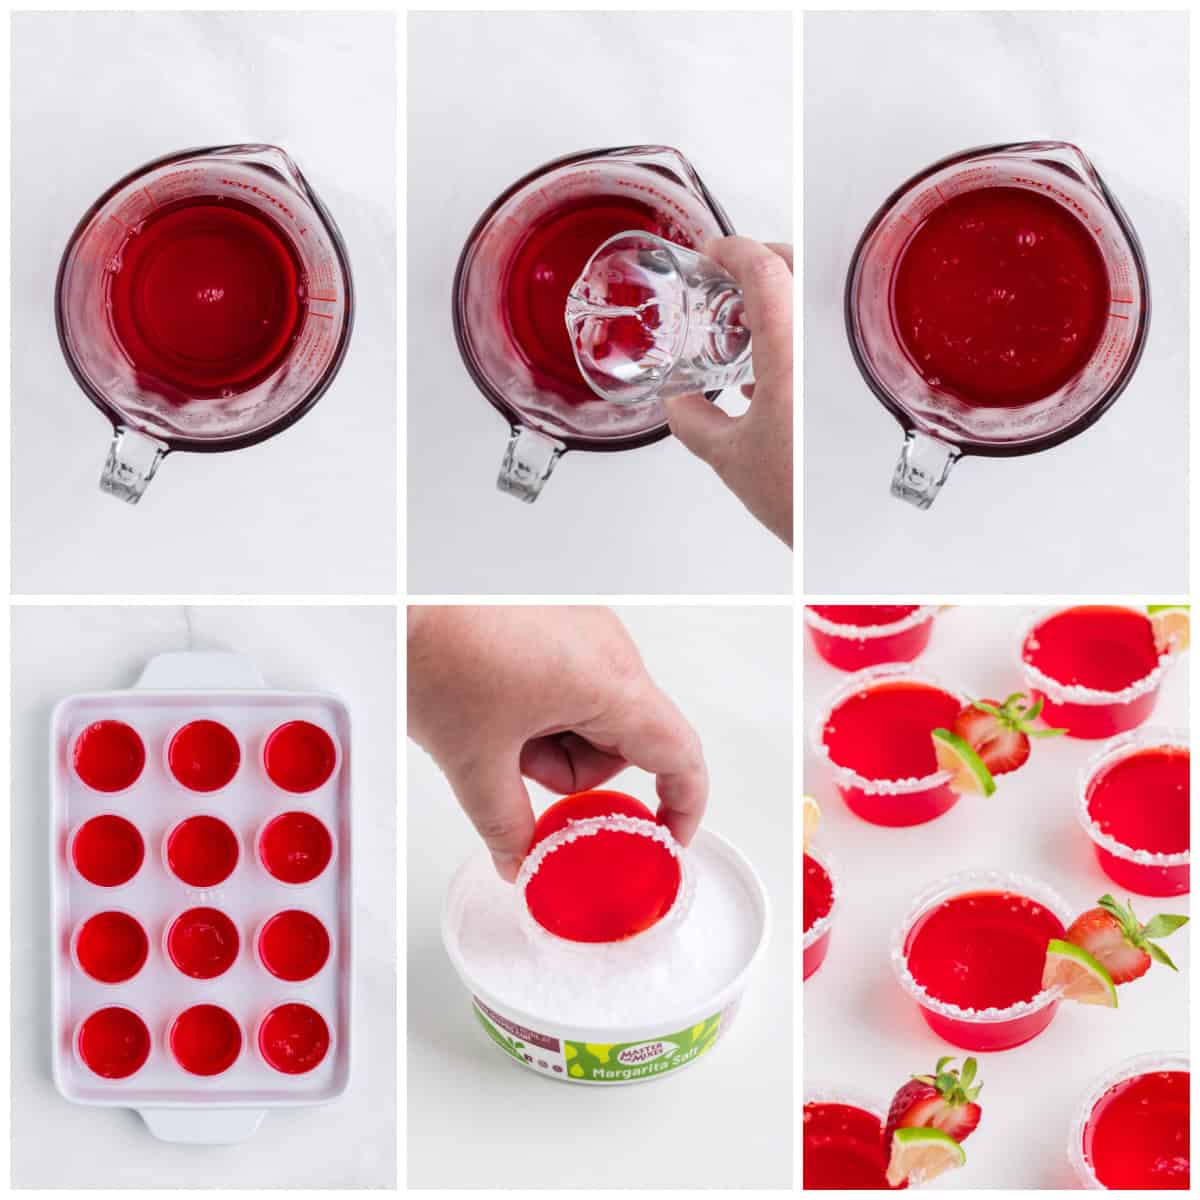 Step by step photos on how to make Strawberry Margarita Jello Shots.